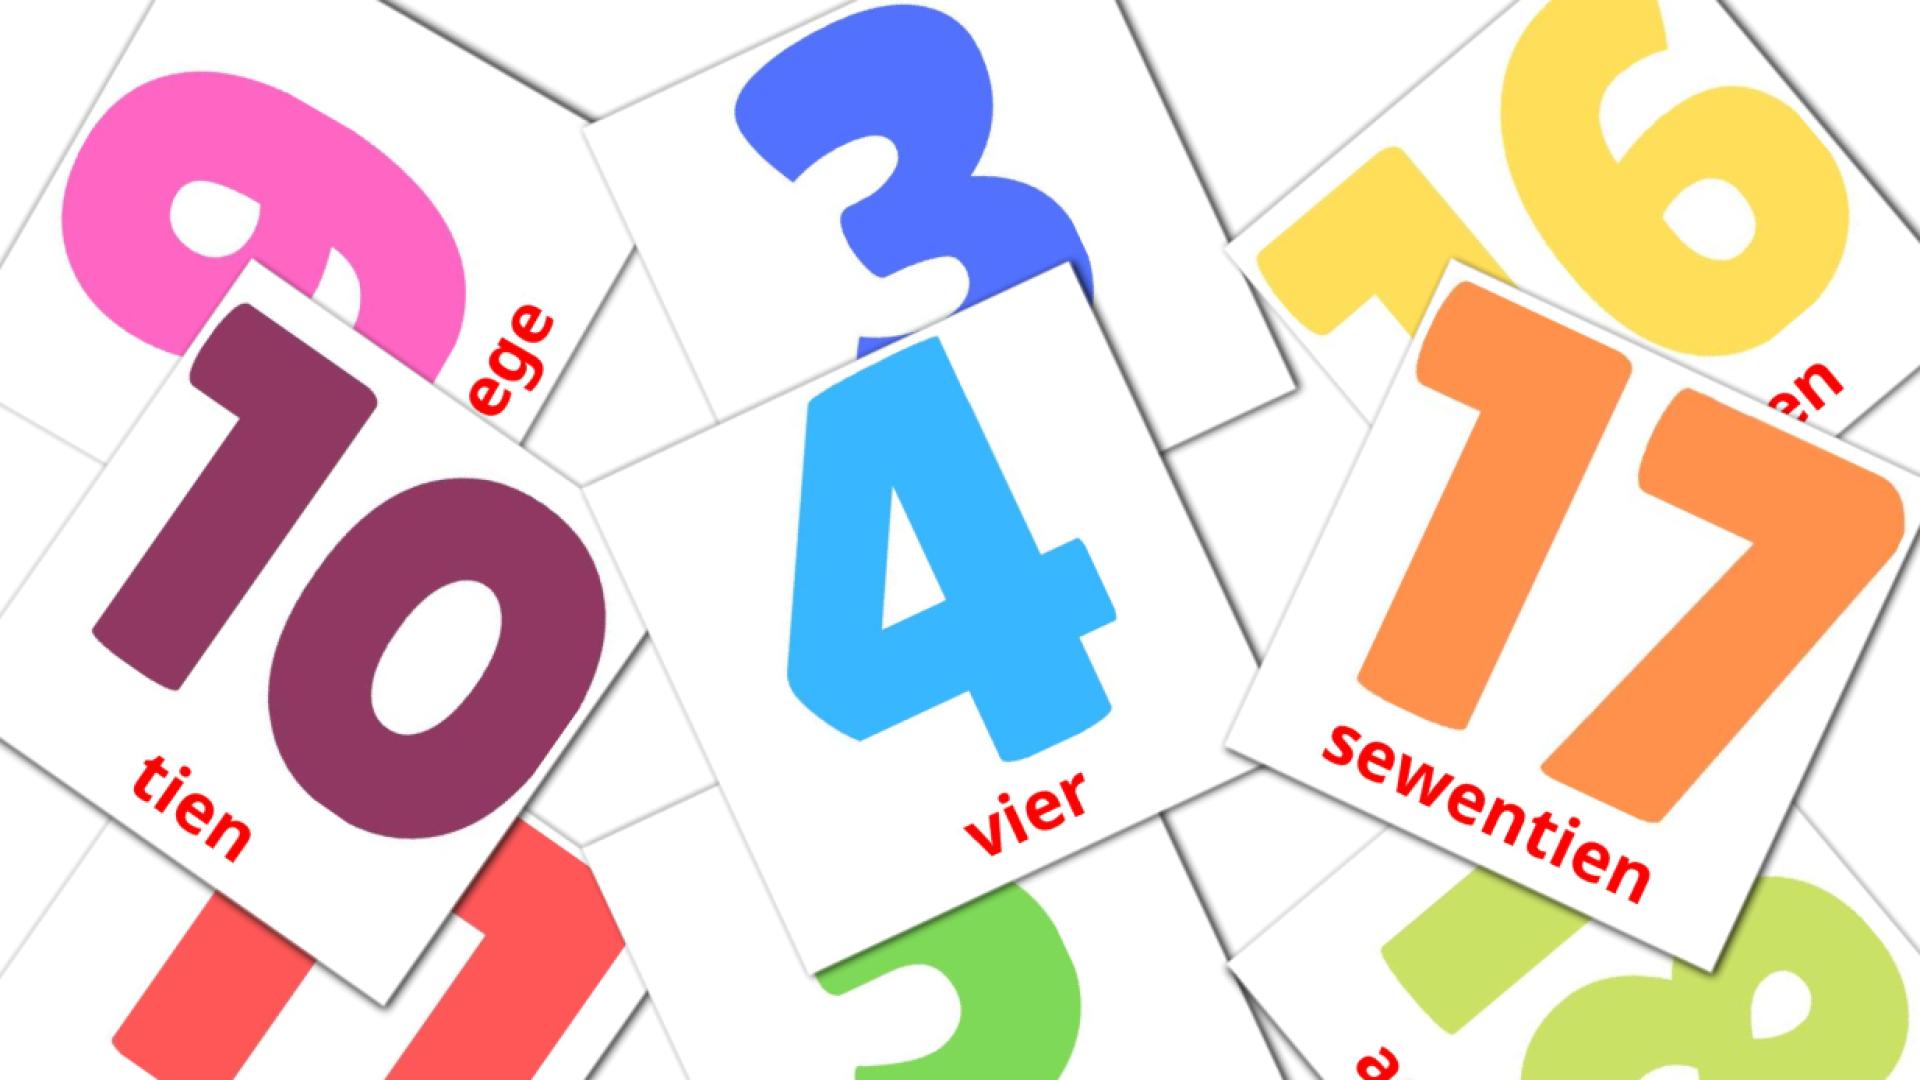 Numbers (1-20) - afrikaans vocabulary cards